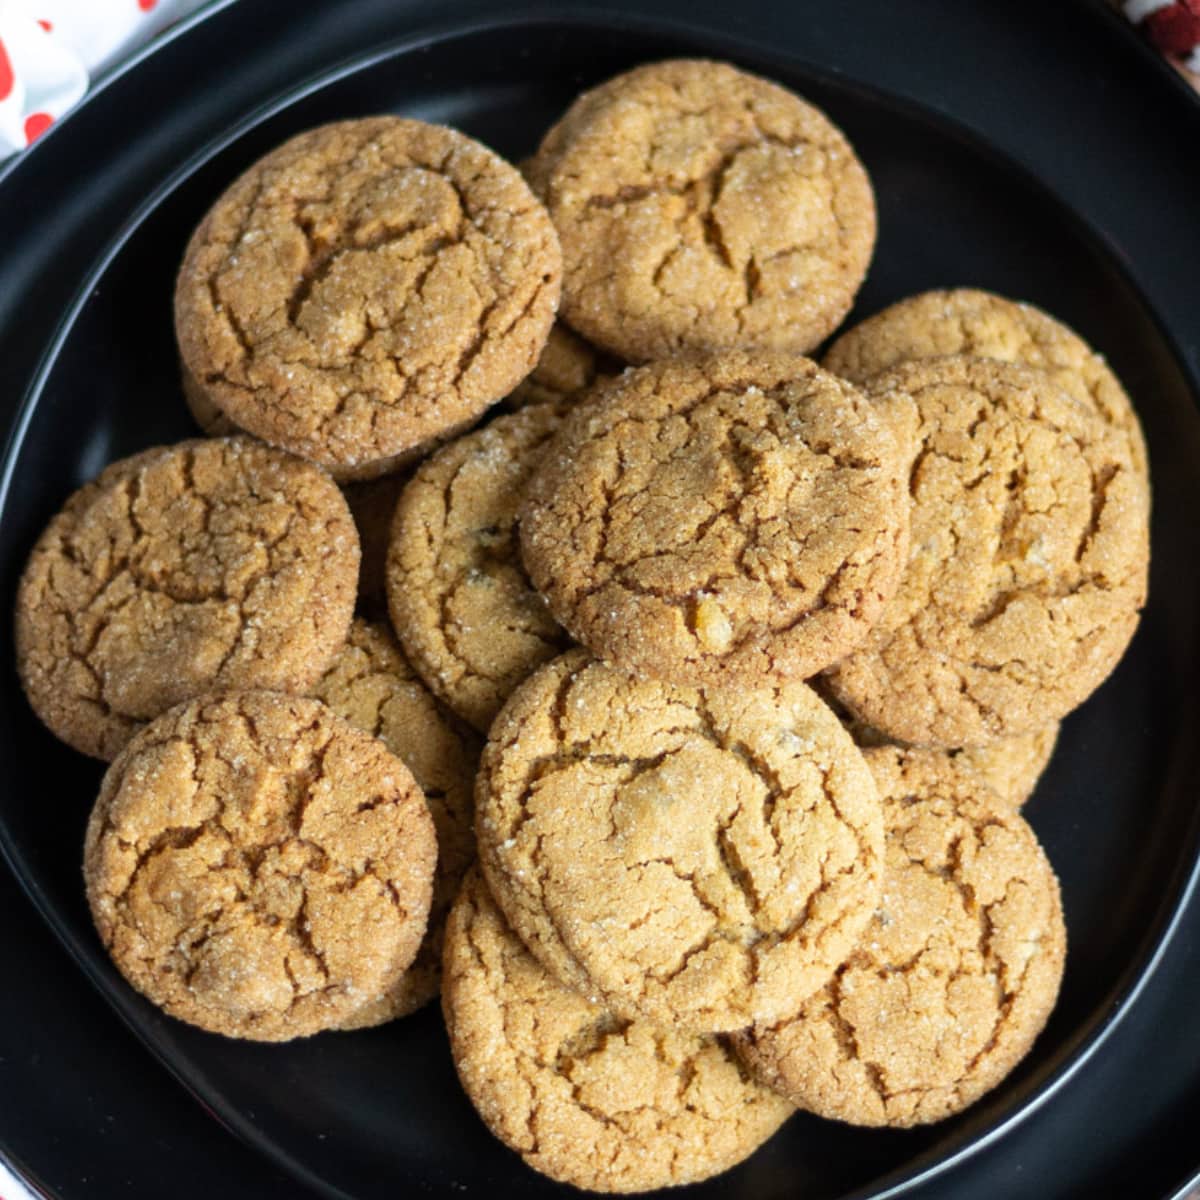 Round ginger cookies on a black plate